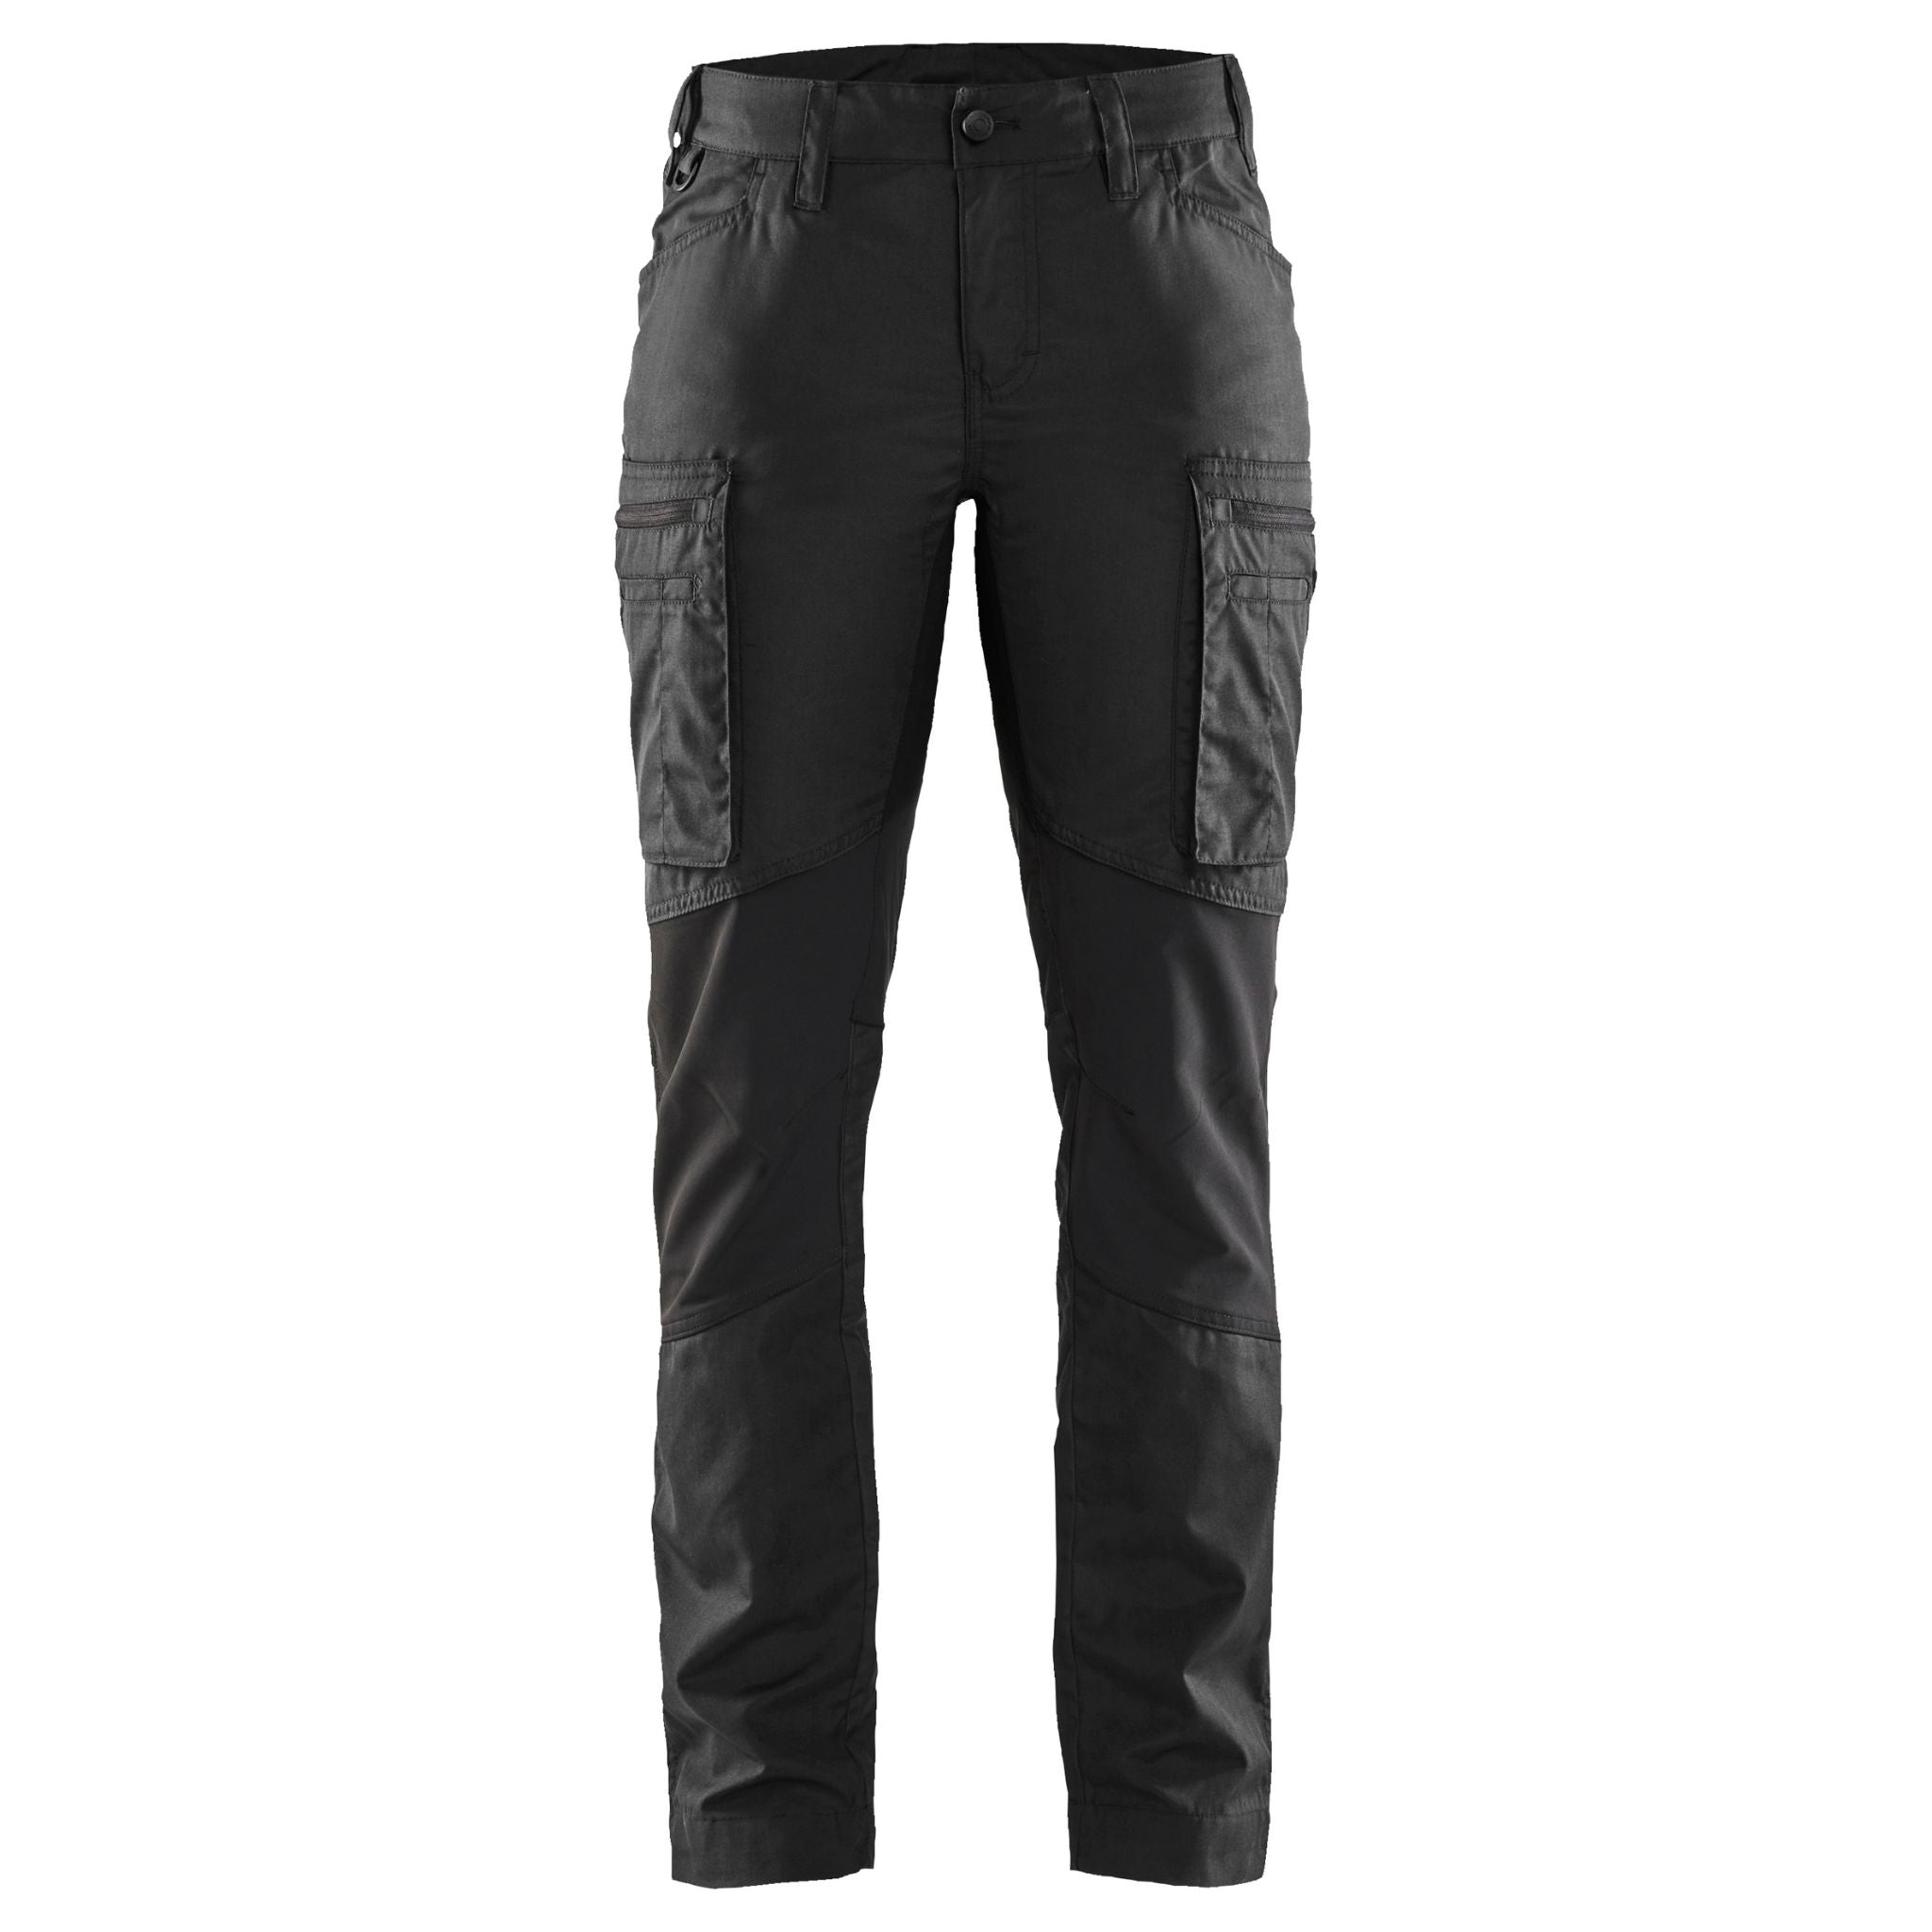 women's show black stretch pants with pockets